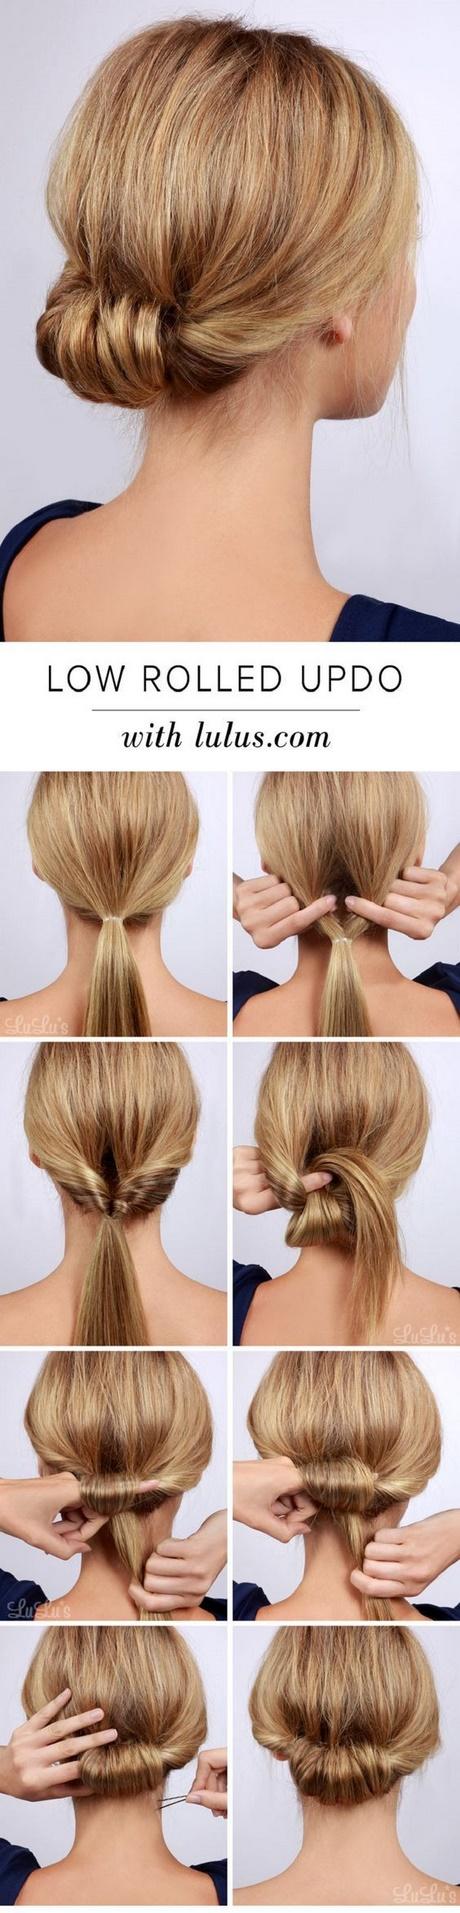 Professional updo hairstyles professional-updo-hairstyles-43_5